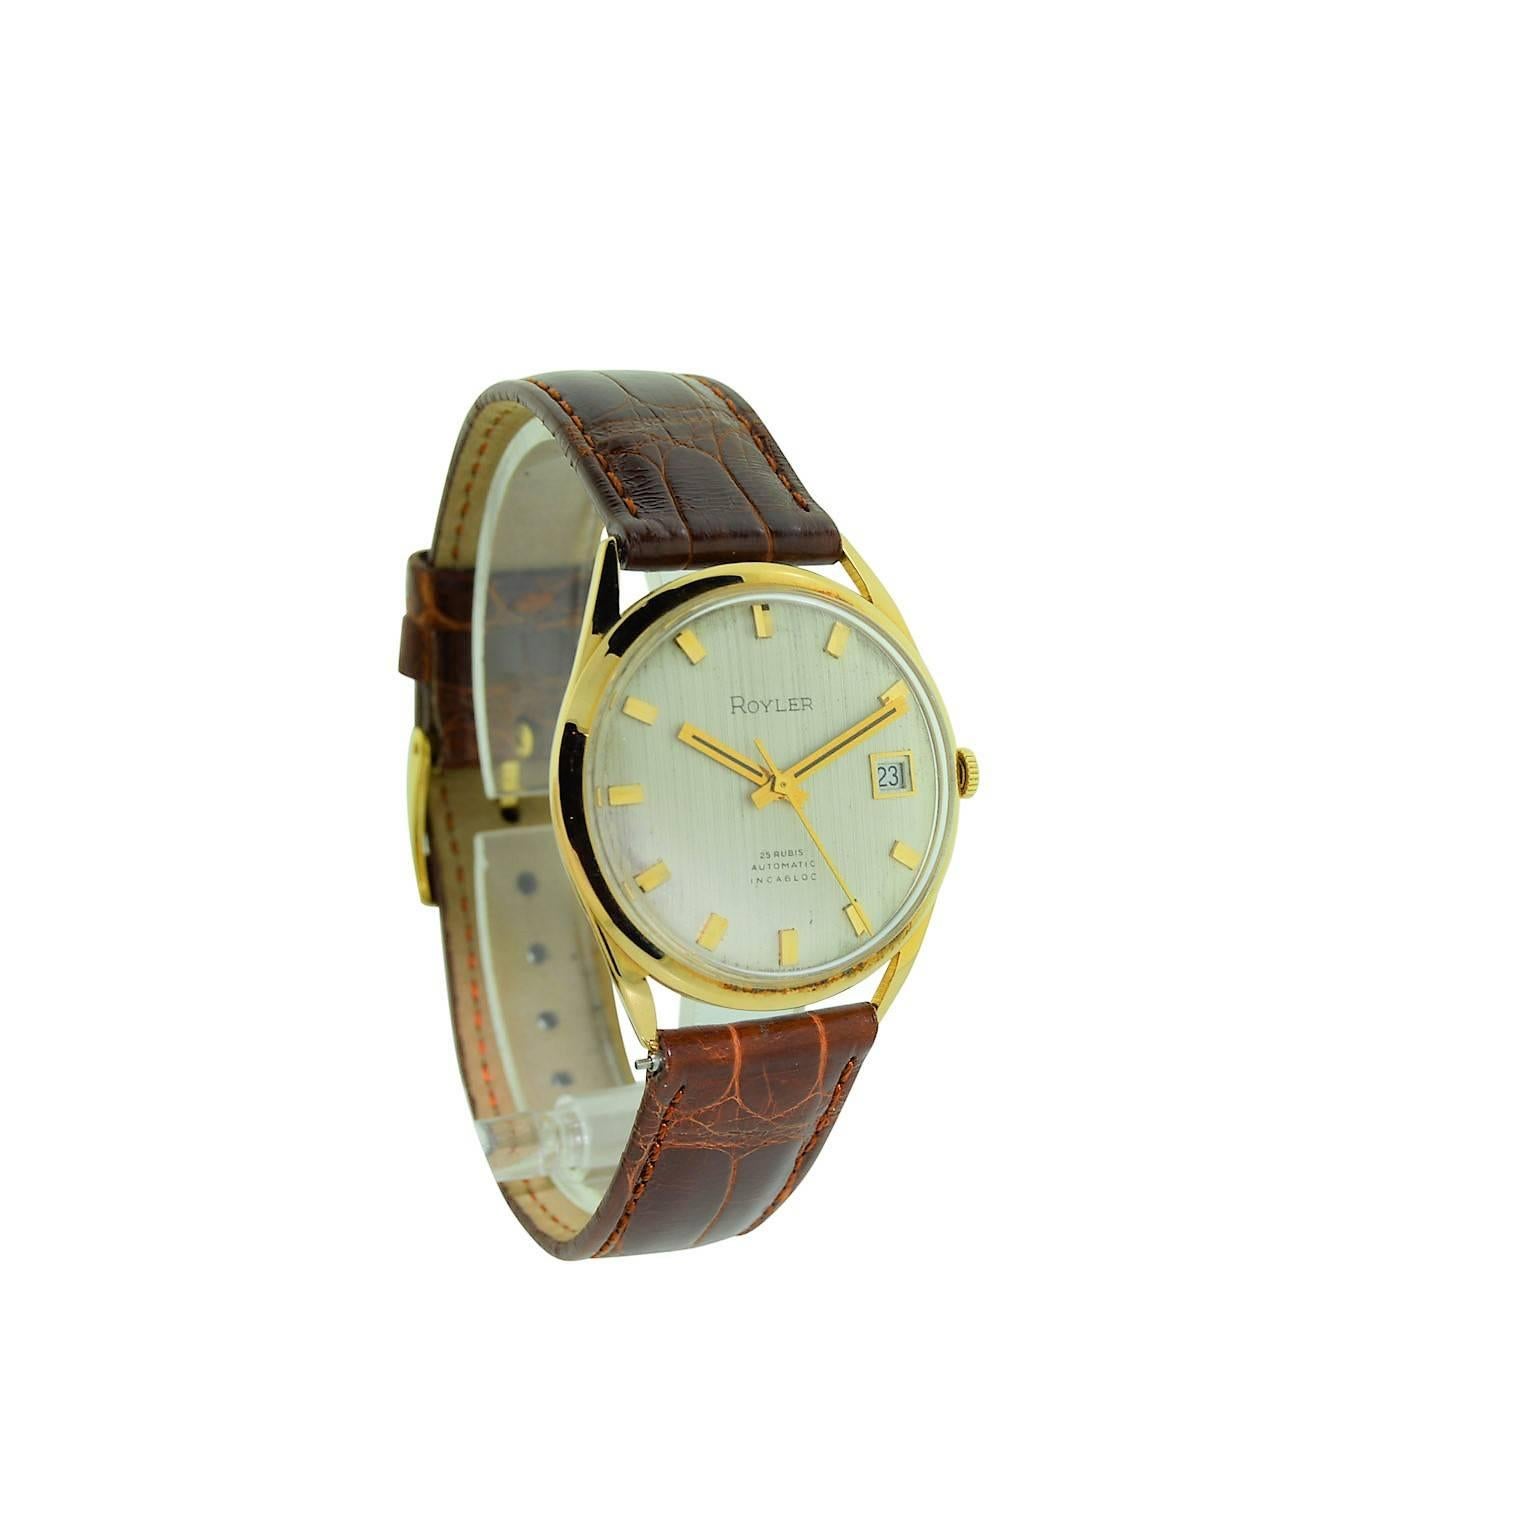 FACTORY / HOUSE: Royler Watch Company
STYLE / REFERENCE: Round Mid Century Design
METAL / MATERIAL: 18 Kt Rose Gold
DIMENSIONS: 42mm X 36mm
CIRCA: 1960's
MOVEMENT / CALIBER: Automatic Winding / 23 Jewels /  4 Adjustments Cal. ETA 2572 /HIgh